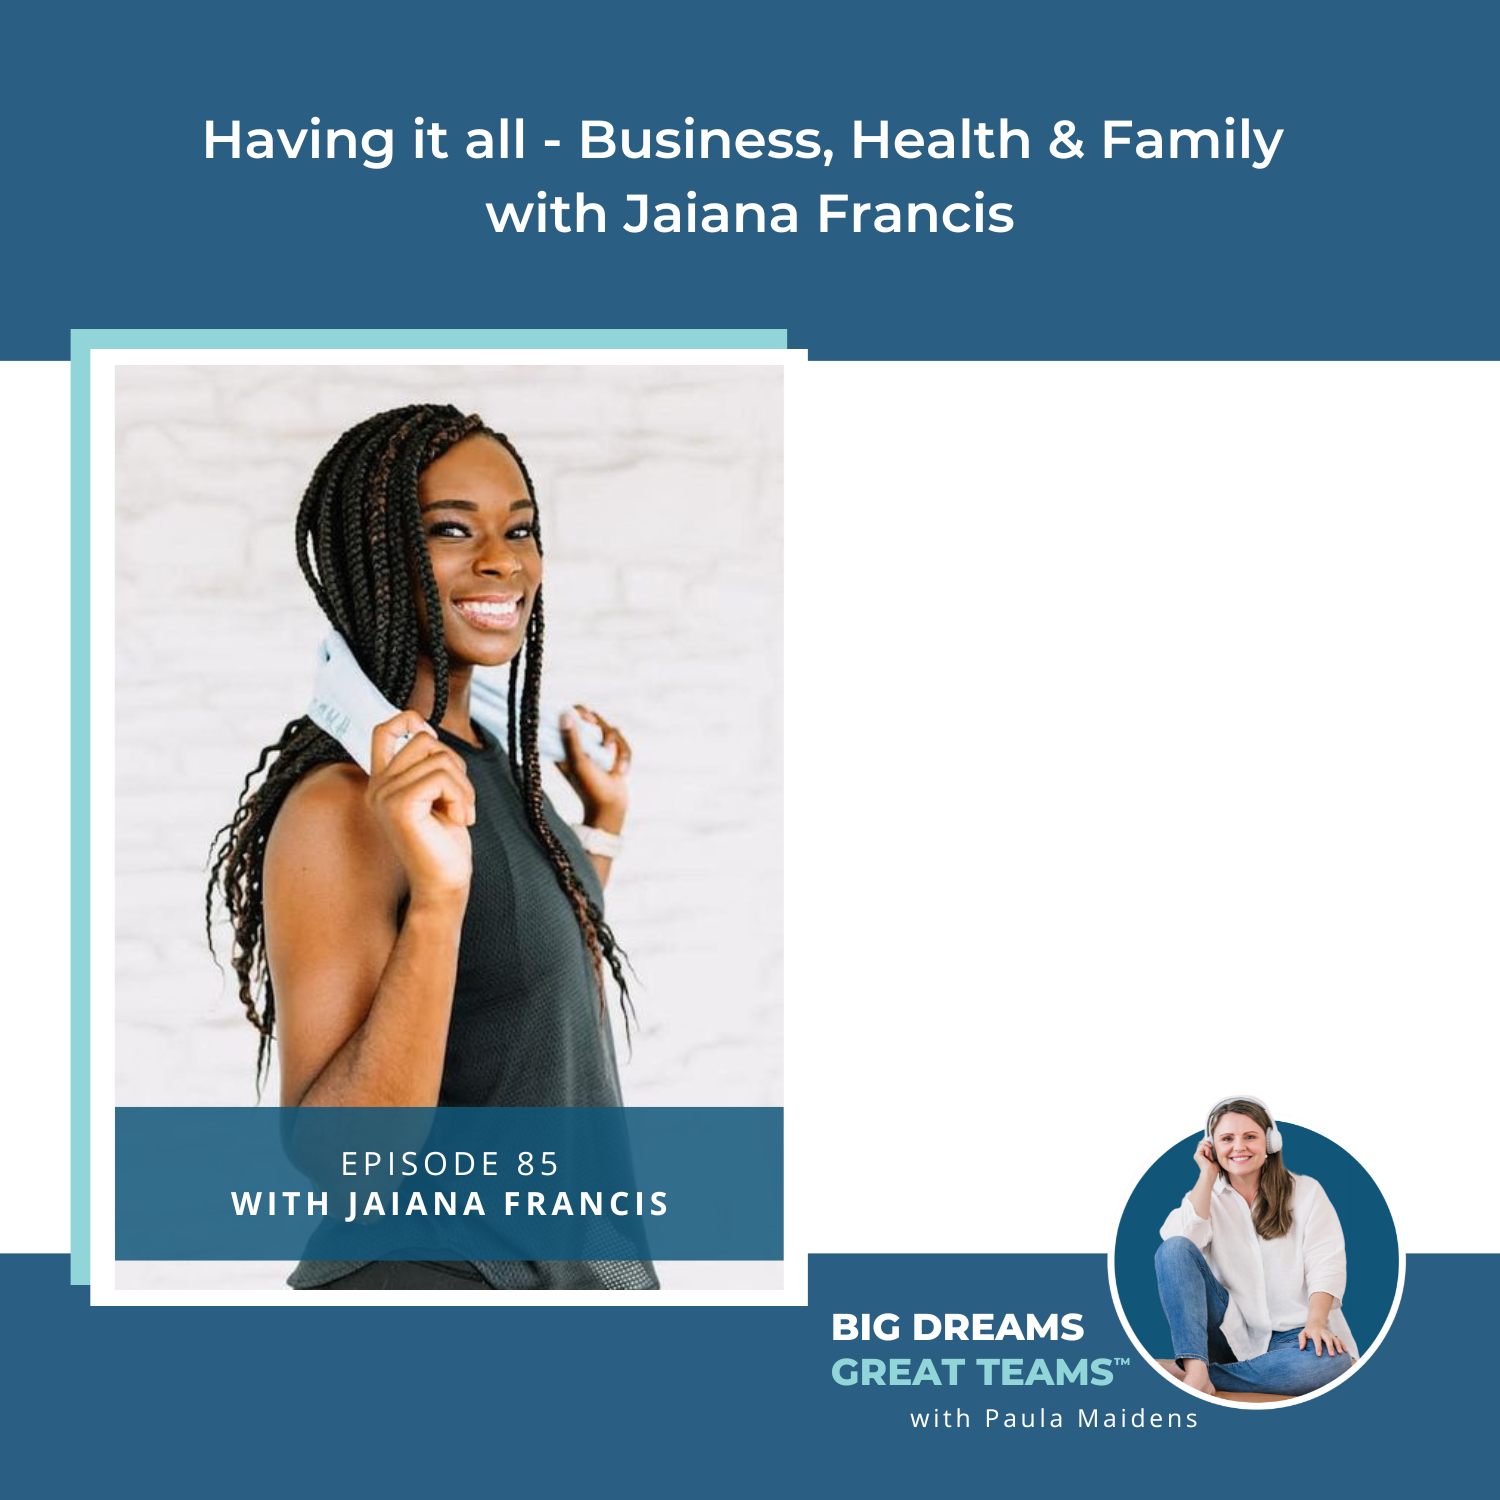 Having it all - Business, Health & Family with Jaiana Francis